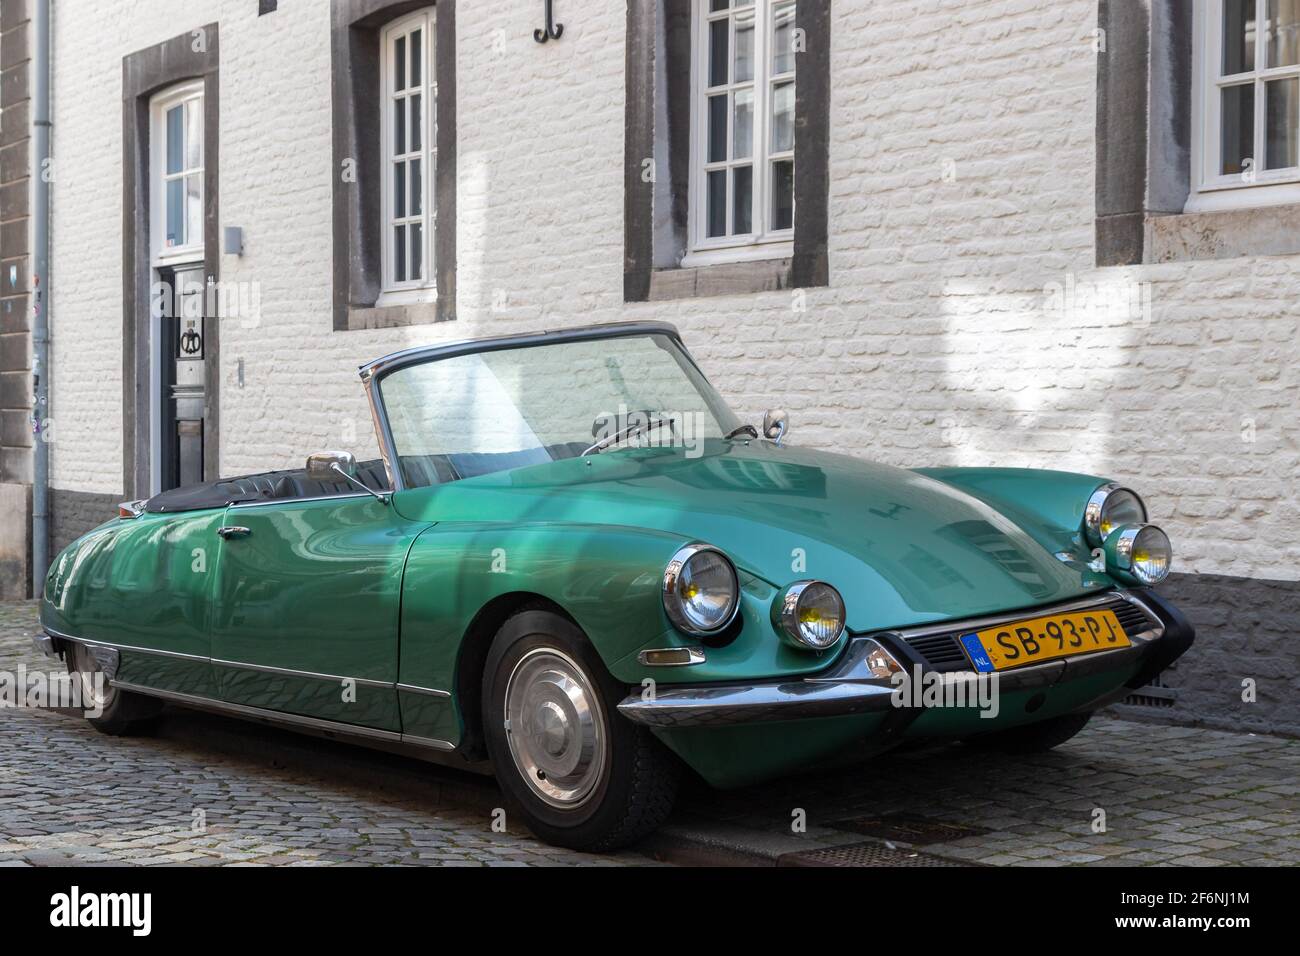 classical Citroën DS 21 car parked in the historical city centre of Maastricht. The car fits to the ancient environment and matches with cobblestones Stock Photo